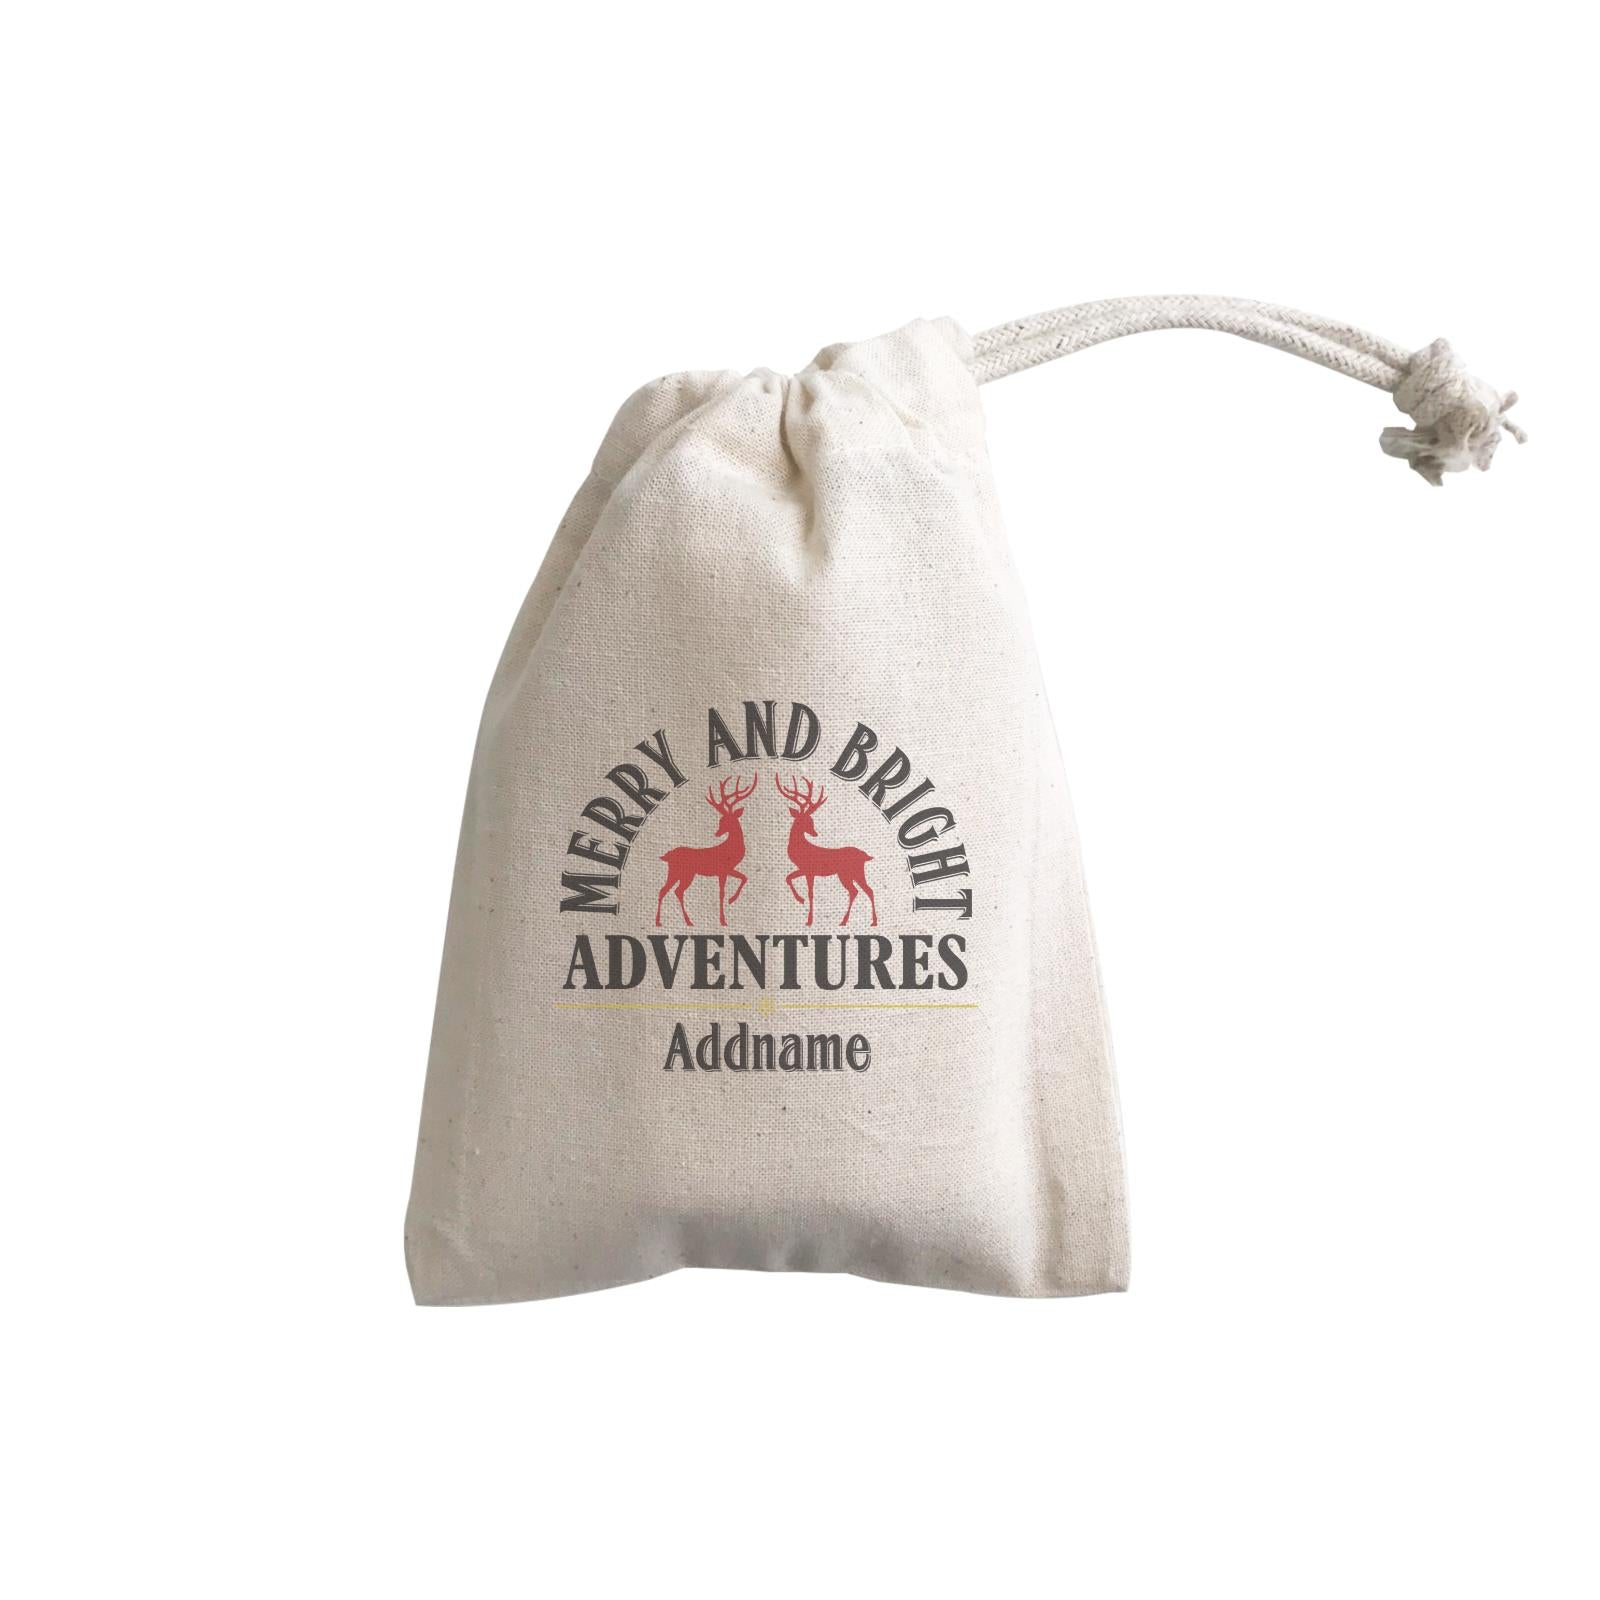 Xmas Merry and Bright Adventures with Reindeers GP Gift Pouch